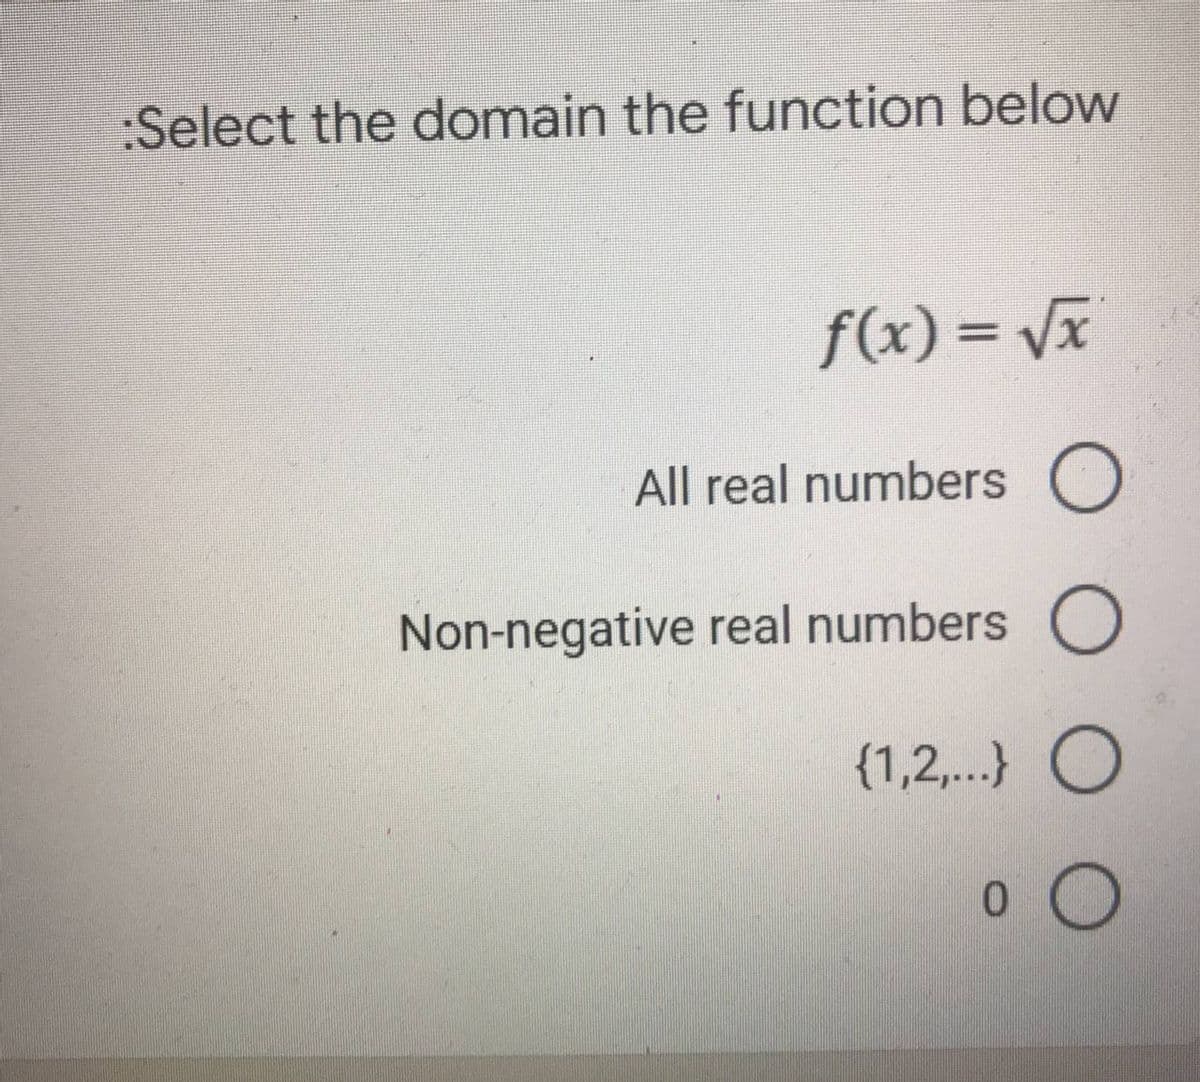 :Select the domain the function below
f(x)=√x
All real numbers O
Non-negative real numbers O
{1,2,...} O
0
O